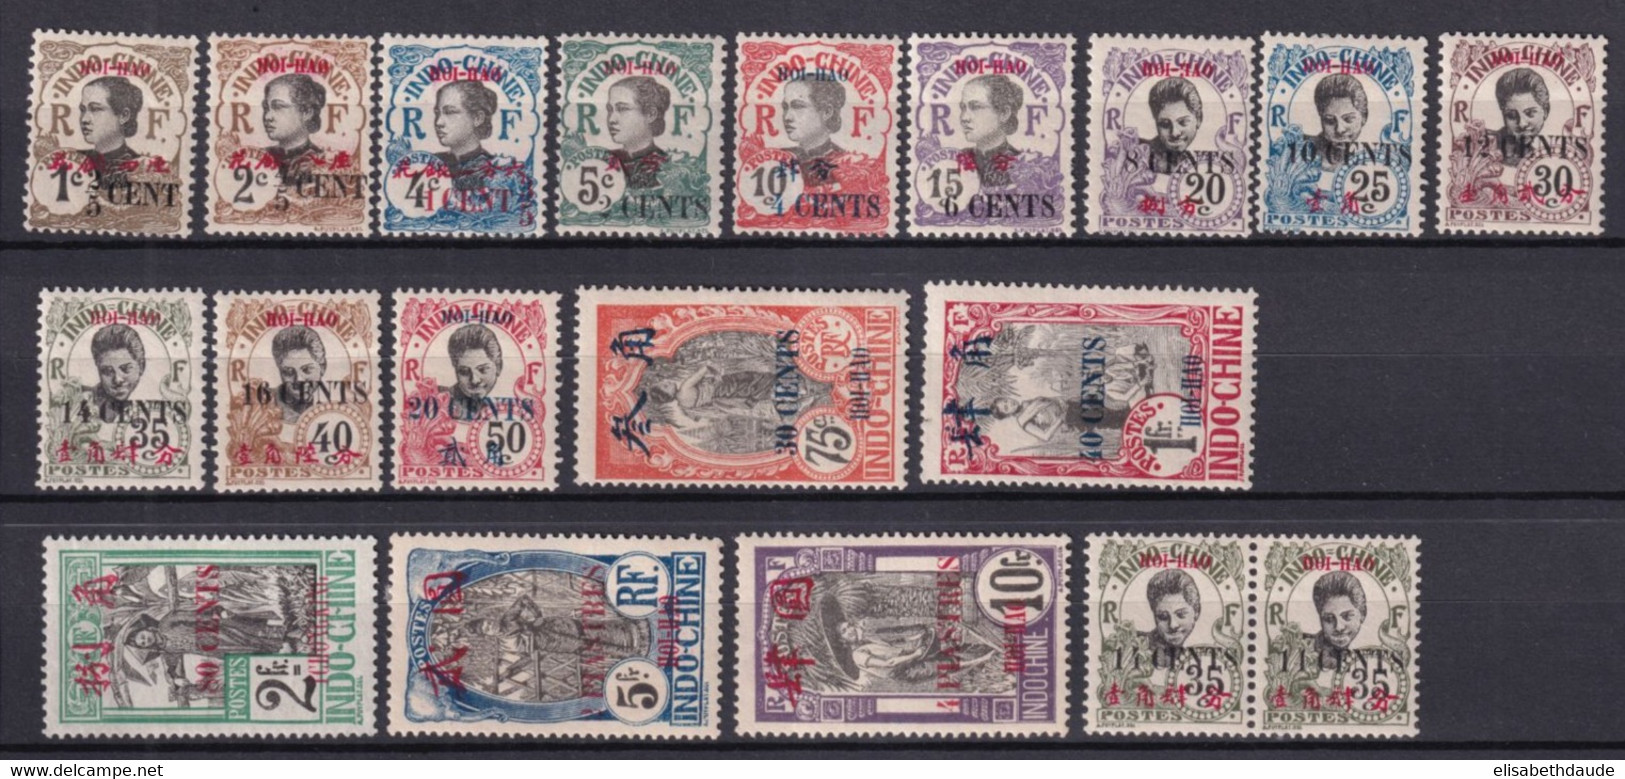 HOI-HAO (CHINE) - SERIE COMPLETE YVERT N°66/82 + PAIRE 75aa * MLH - COTE YVERT = 503 EUR - 10F SIGNE BRUN ! - Neufs